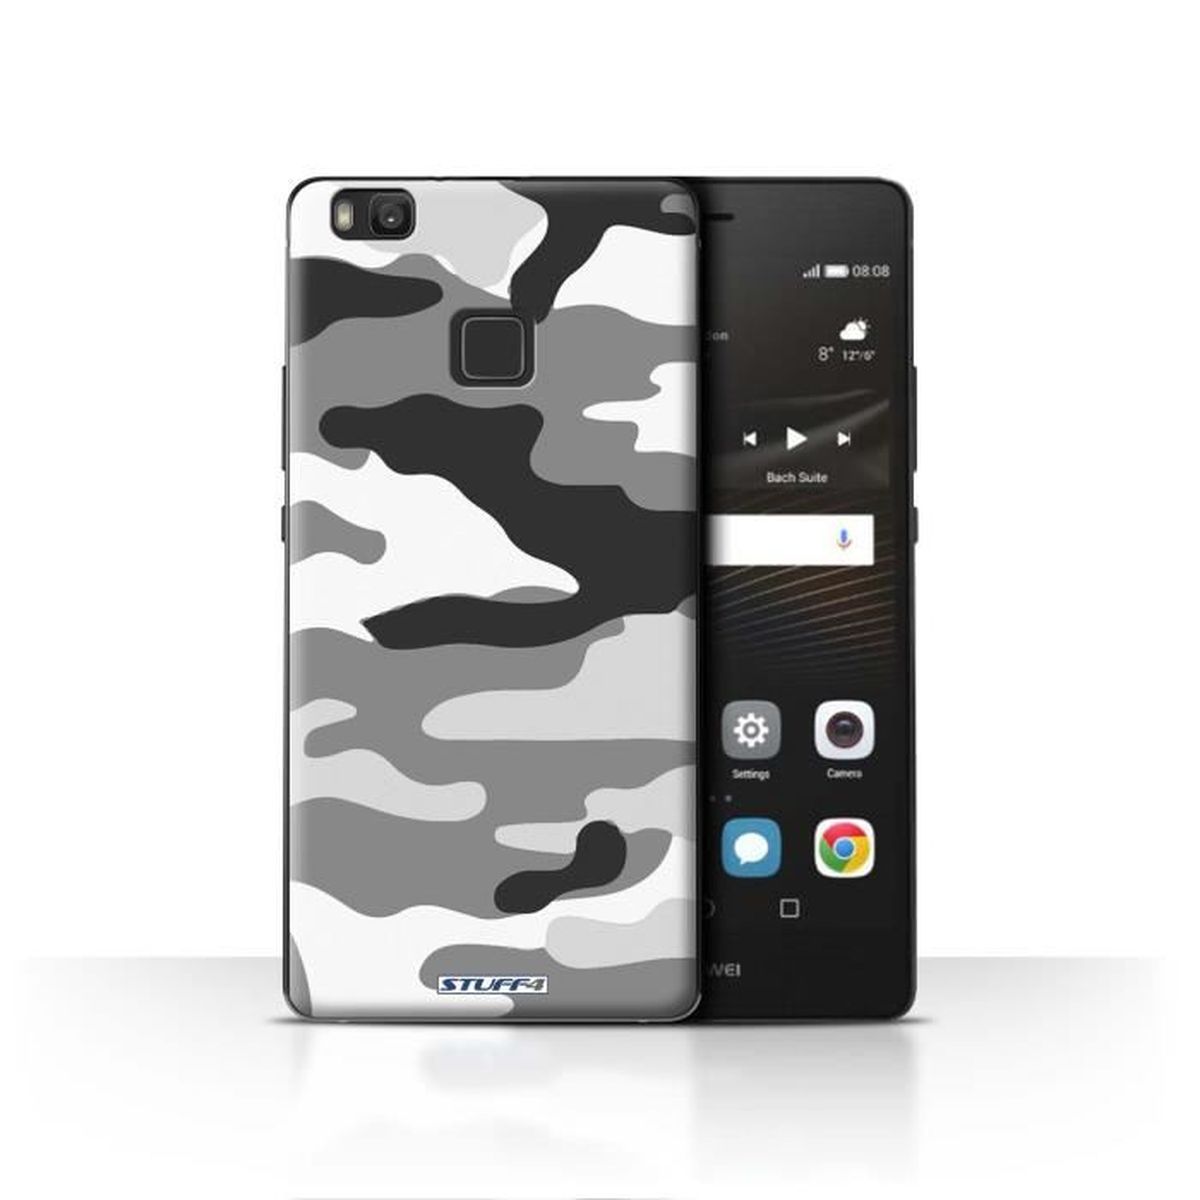 coque huawei p9 lite camouflage